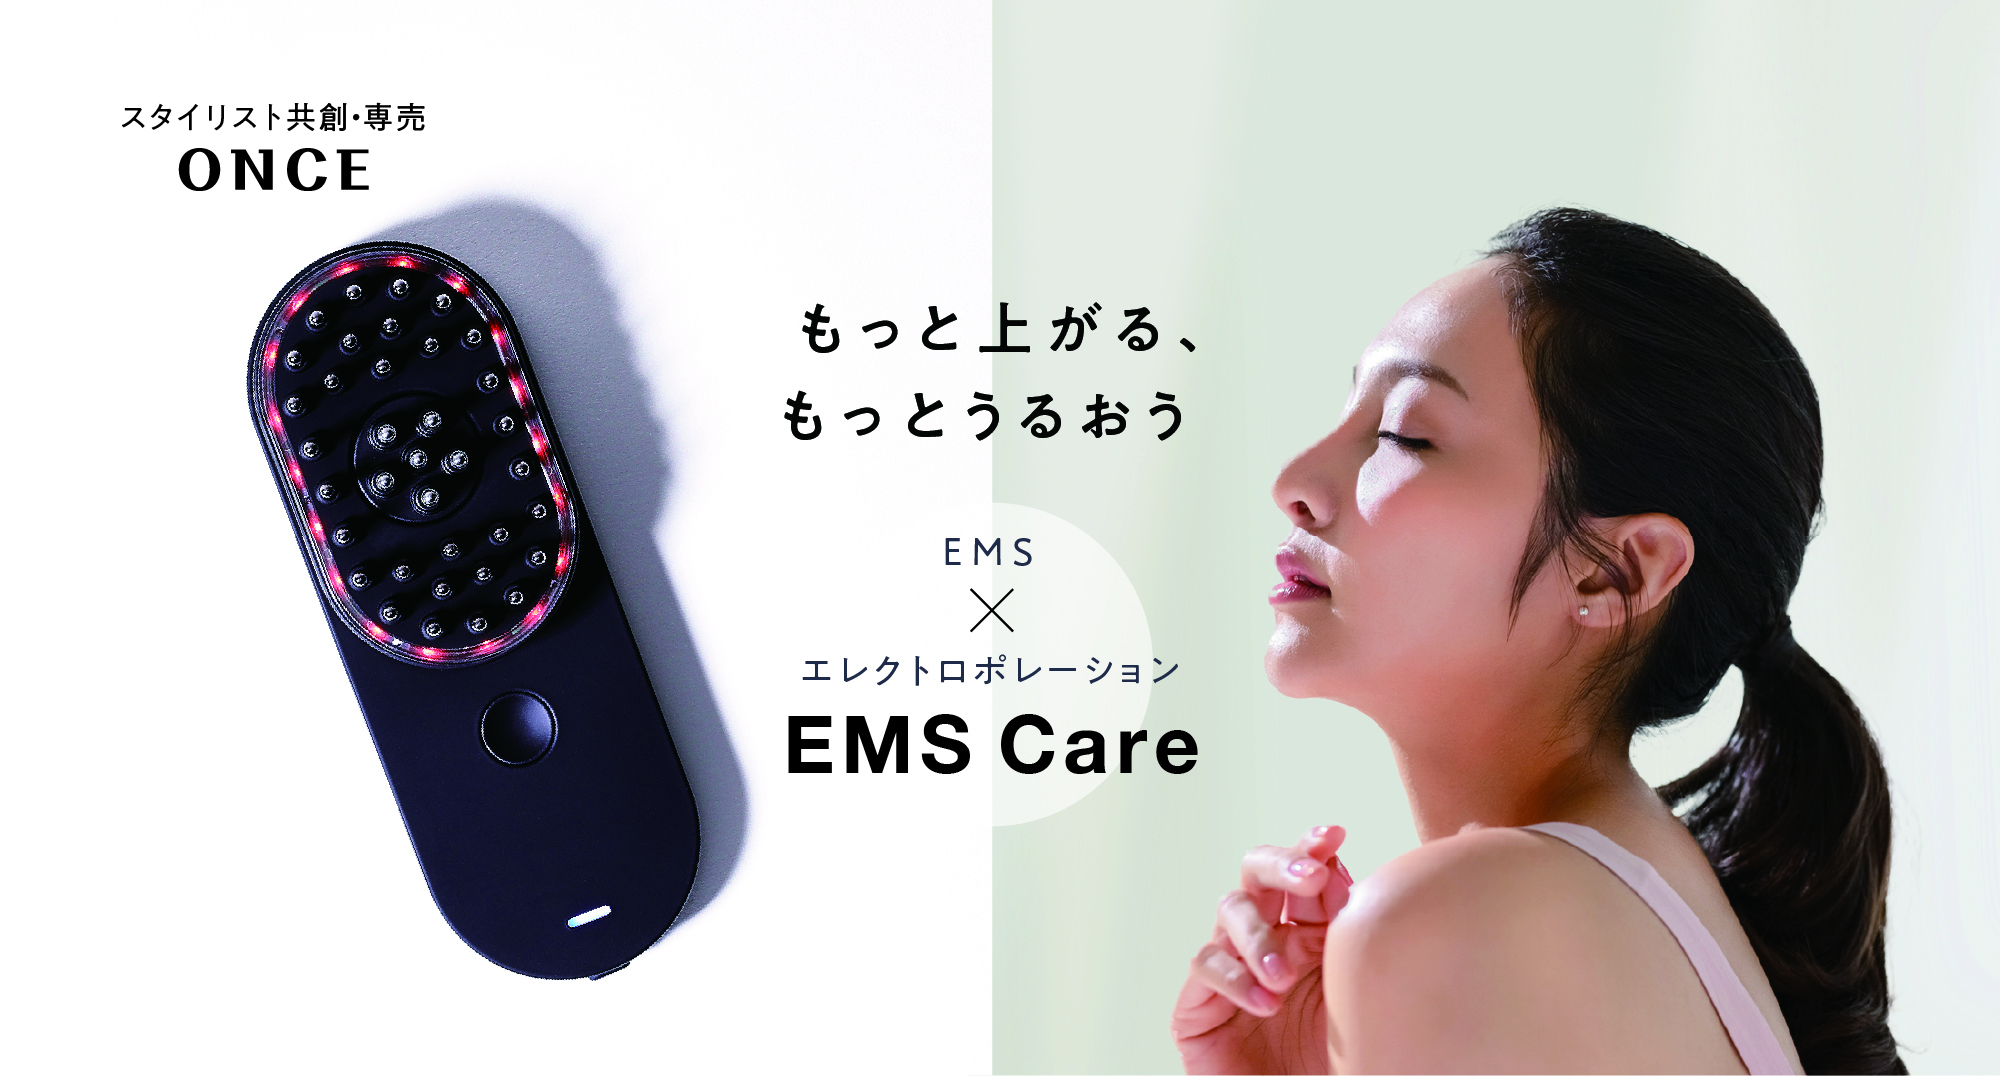 ONCE EMS care 電気バリブラシ - 美容機器